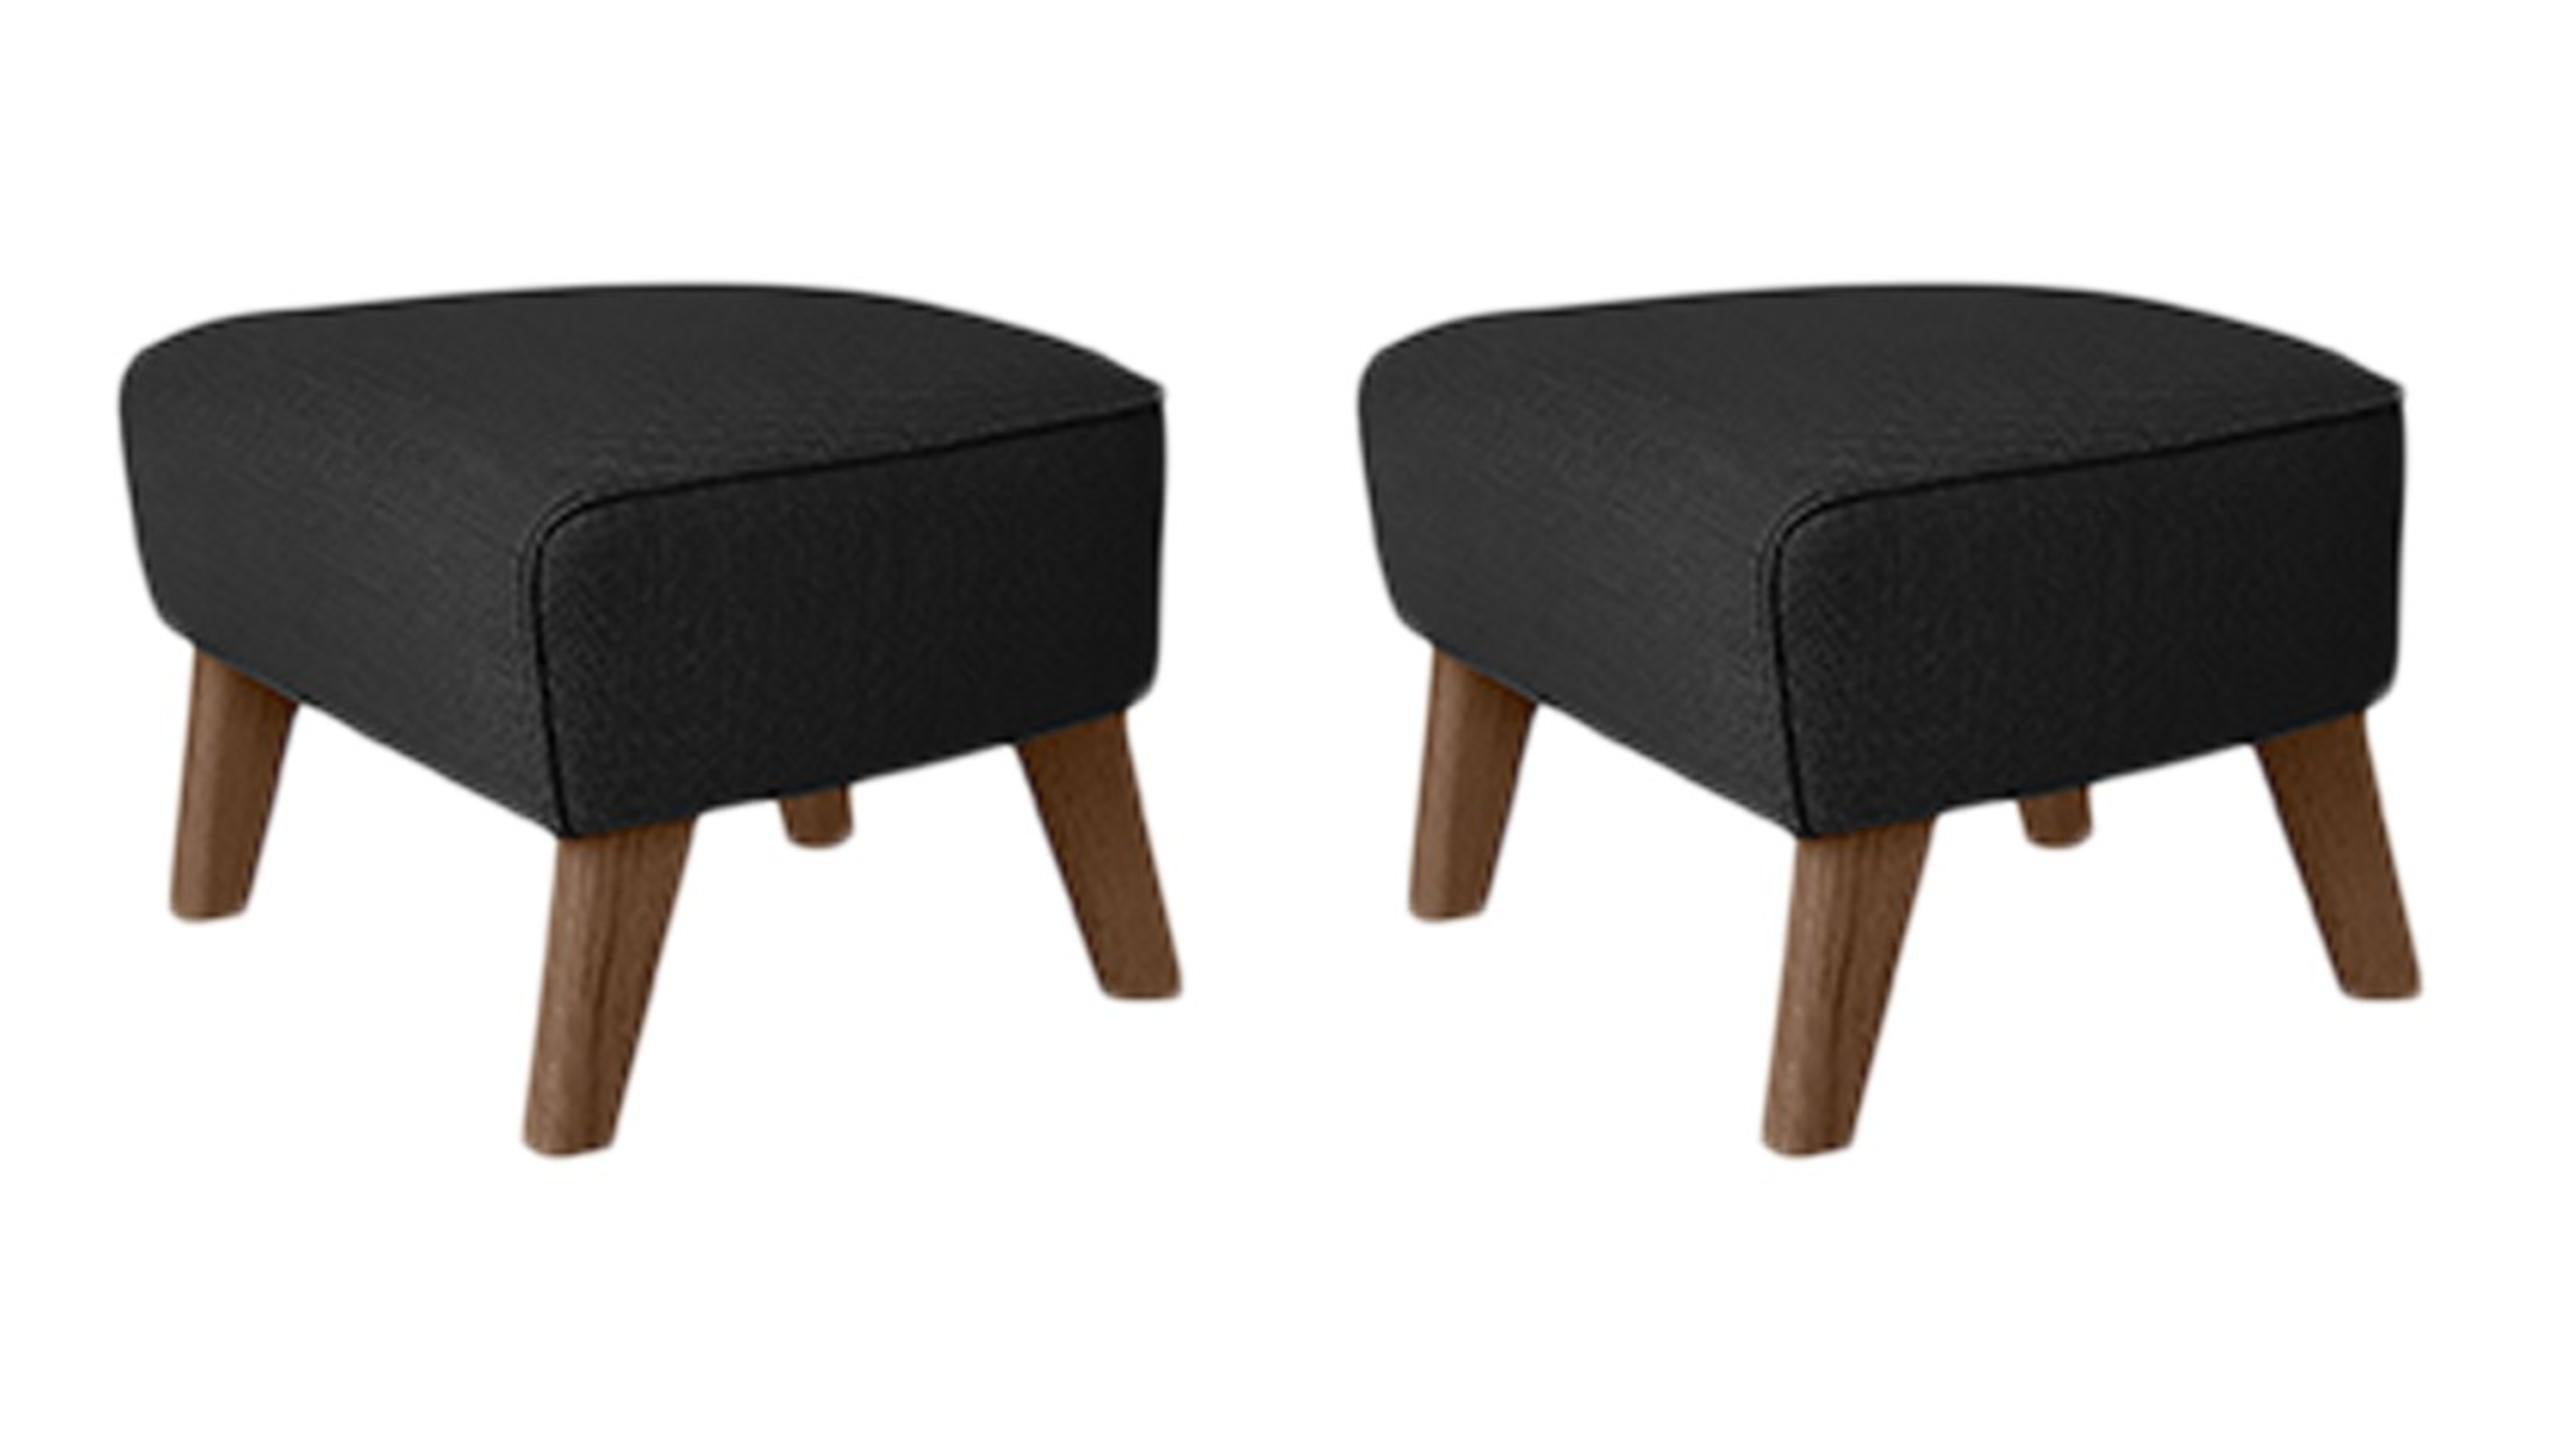 Set of 2 dark grey, smoked oak RafSimonsVidar3 my own chair footstool by Lassen
Dimensions: W 56 x D 58 x H 40 cm 
Materials: Textile
Also available: Other colors available

The my own chair footstool has been designed in the same spirit as